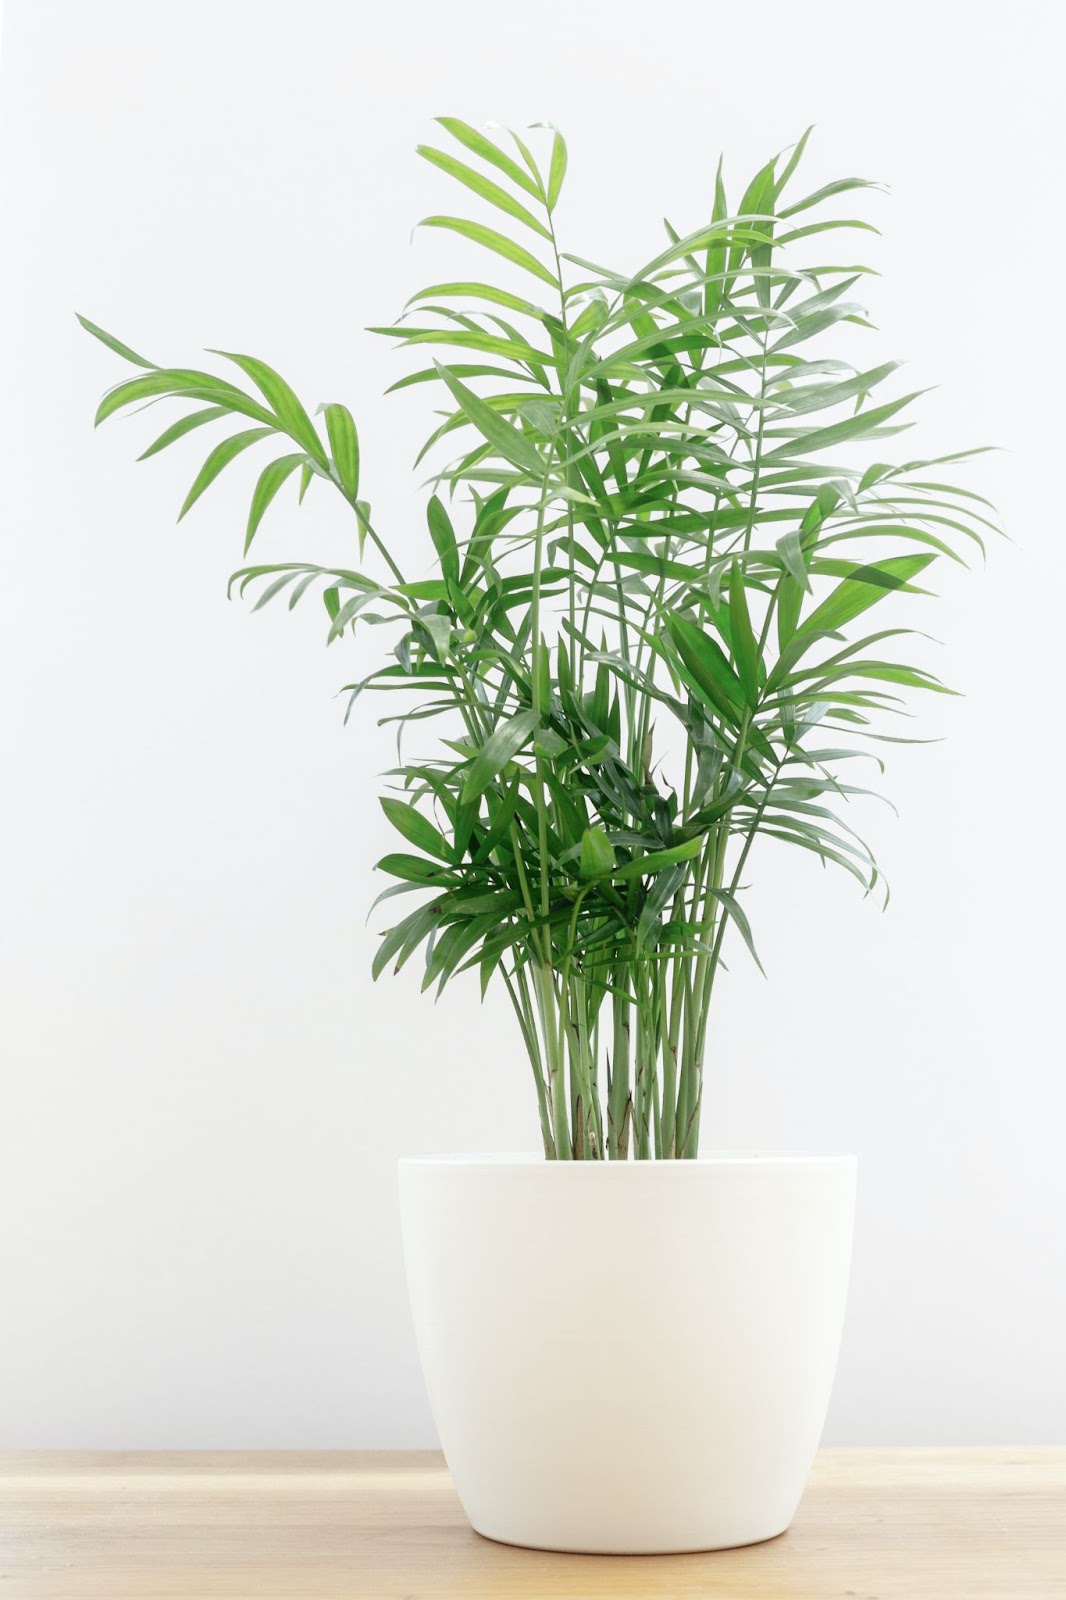 Parlor Palm in a white pot. 